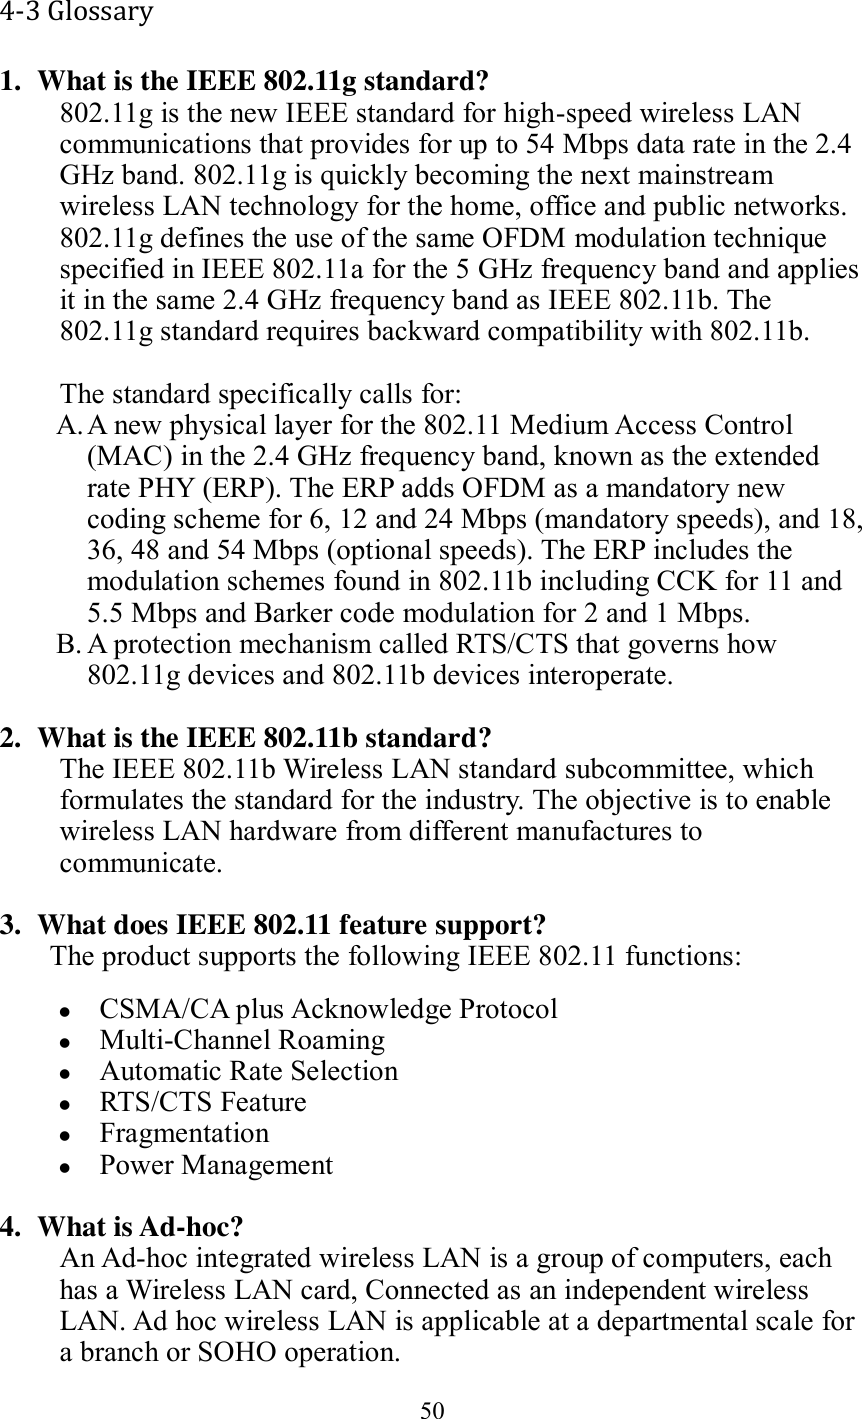 50  4-3 Glossary 1. What is the IEEE 802.11g standard? 802.11g is the new IEEE standard for high-speed wireless LAN communications that provides for up to 54 Mbps data rate in the 2.4 GHz band. 802.11g is quickly becoming the next mainstream wireless LAN technology for the home, office and public networks.   802.11g defines the use of the same OFDM modulation technique specified in IEEE 802.11a for the 5 GHz frequency band and applies it in the same 2.4 GHz frequency band as IEEE 802.11b. The 802.11g standard requires backward compatibility with 802.11b.  The standard specifically calls for:   A. A new physical layer for the 802.11 Medium Access Control (MAC) in the 2.4 GHz frequency band, known as the extended rate PHY (ERP). The ERP adds OFDM as a mandatory new coding scheme for 6, 12 and 24 Mbps (mandatory speeds), and 18, 36, 48 and 54 Mbps (optional speeds). The ERP includes the modulation schemes found in 802.11b including CCK for 11 and 5.5 Mbps and Barker code modulation for 2 and 1 Mbps. B. A protection mechanism called RTS/CTS that governs how 802.11g devices and 802.11b devices interoperate.  2. What is the IEEE 802.11b standard? The IEEE 802.11b Wireless LAN standard subcommittee, which formulates the standard for the industry. The objective is to enable wireless LAN hardware from different manufactures to communicate.  3. What does IEEE 802.11 feature support? The product supports the following IEEE 802.11 functions:  CSMA/CA plus Acknowledge Protocol  Multi-Channel Roaming  Automatic Rate Selection  RTS/CTS Feature  Fragmentation  Power Management  4. What is Ad-hoc? An Ad-hoc integrated wireless LAN is a group of computers, each has a Wireless LAN card, Connected as an independent wireless LAN. Ad hoc wireless LAN is applicable at a departmental scale for a branch or SOHO operation. 